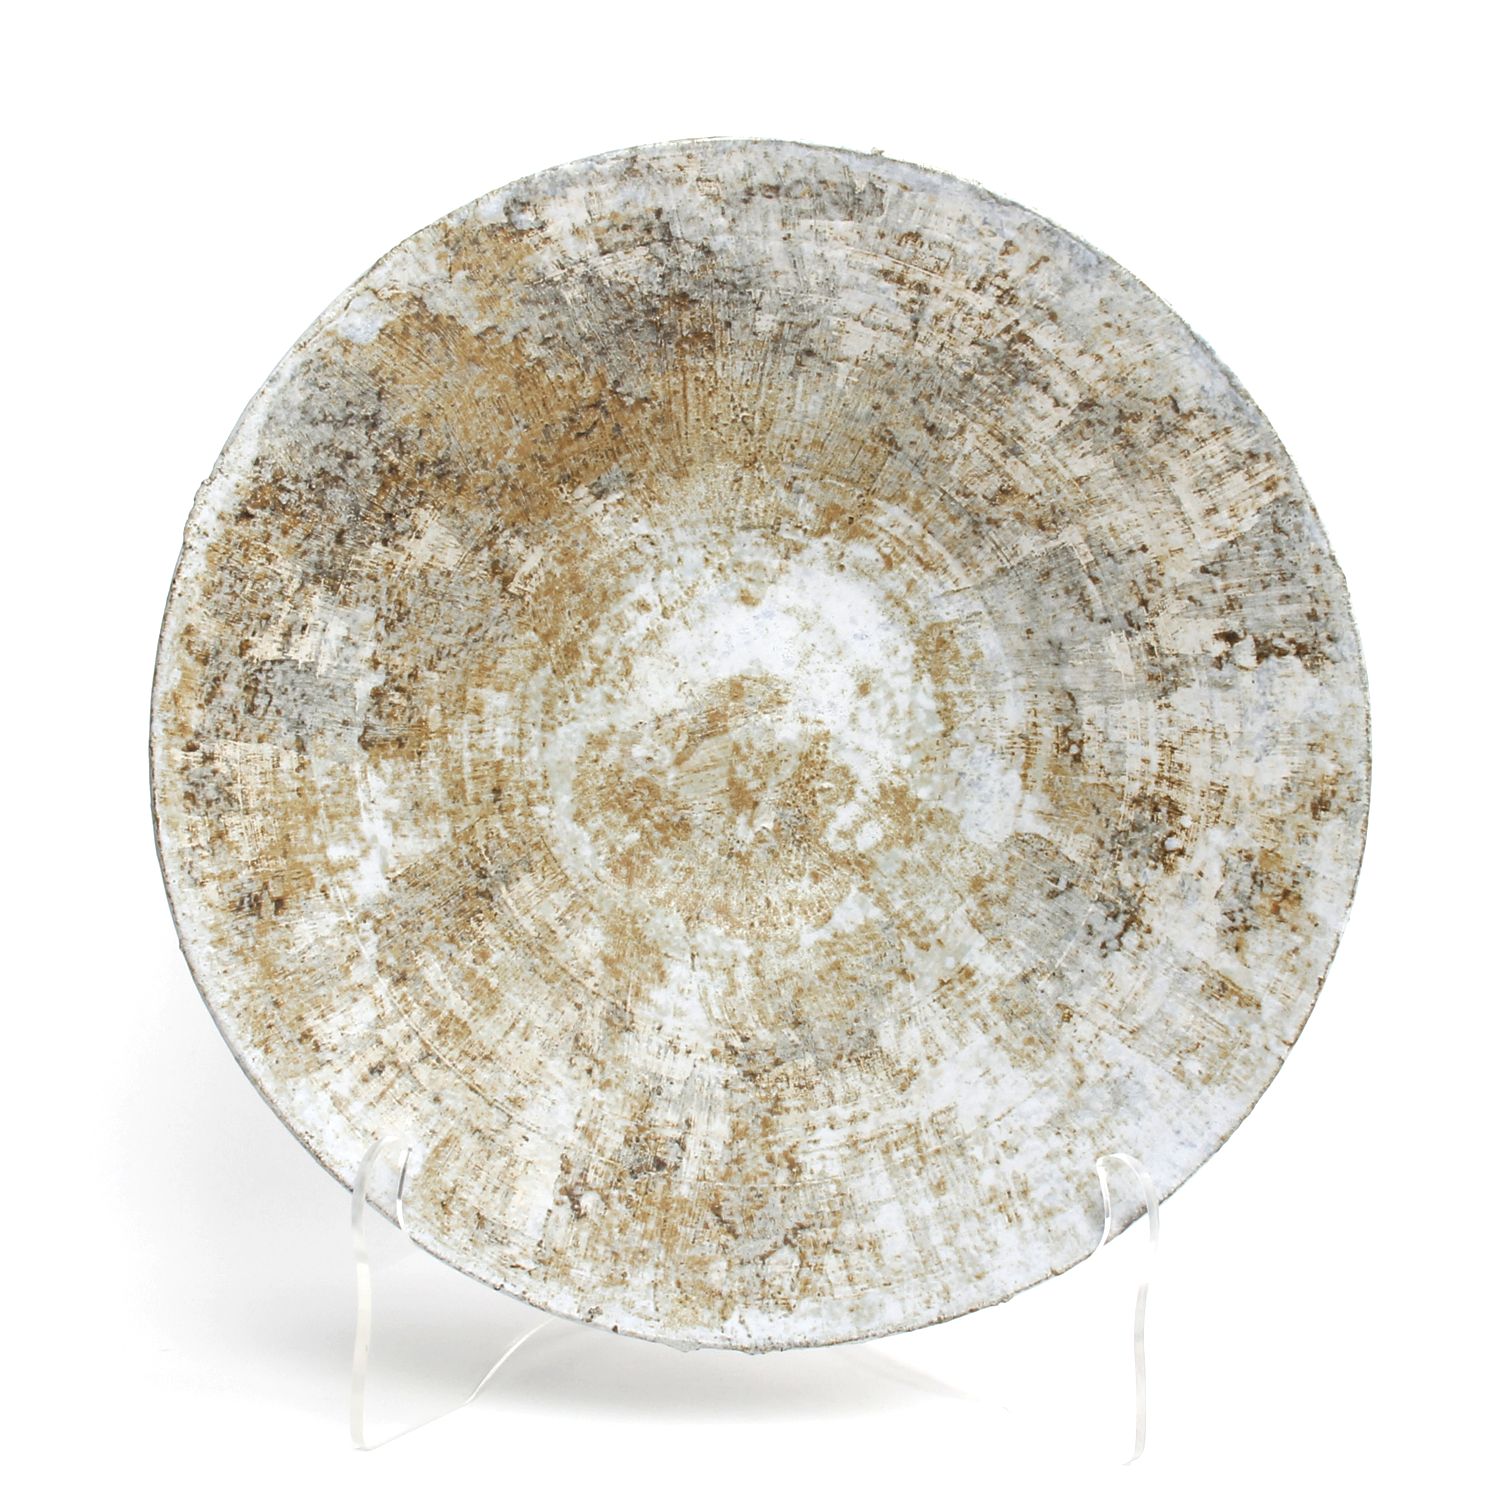 Makiko Hicher: Large Wide Bowl Product Image 1 of 2